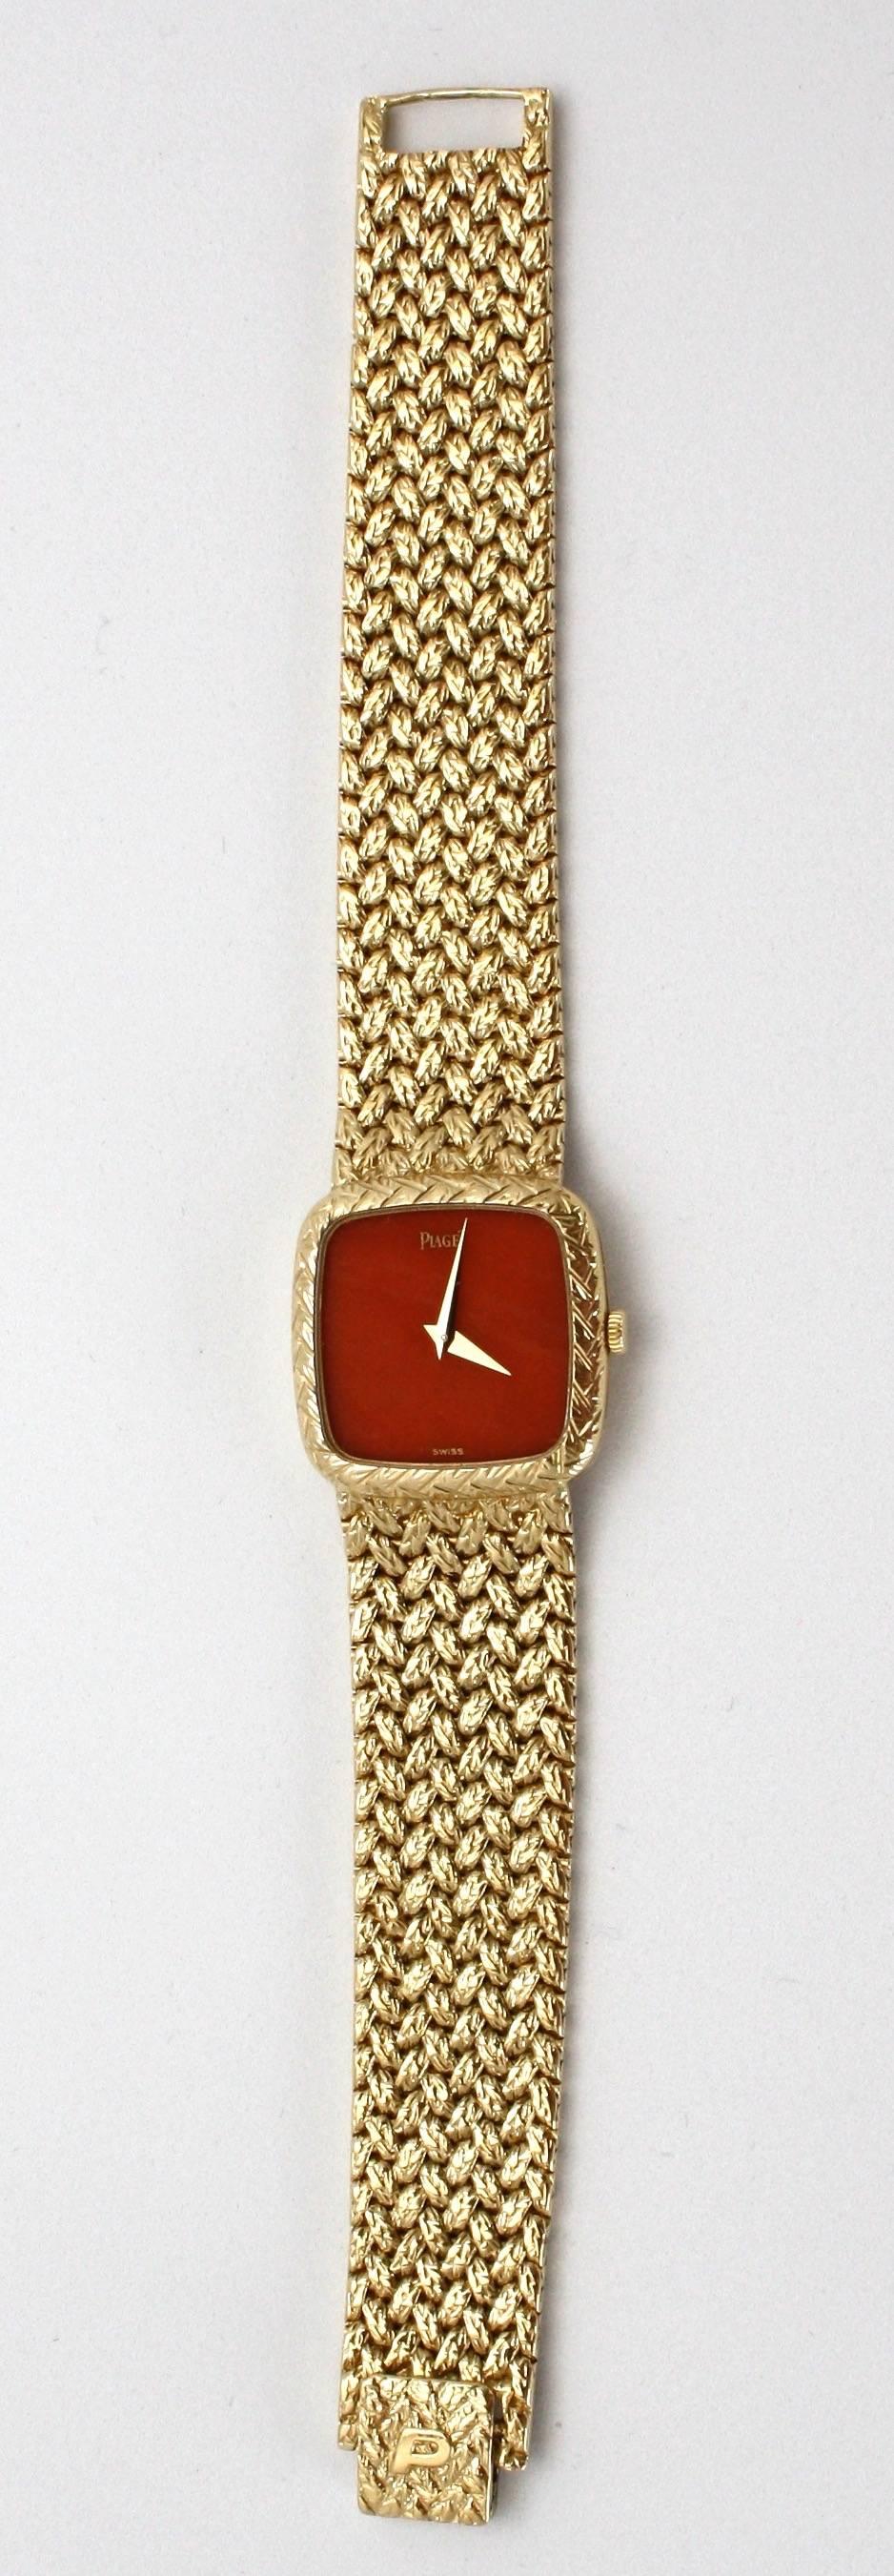 This amazing watch is for collectors.  It is a Piaget with a Coral Face and woven bracelet band. This is very rare and highly collectible.  Coral has been endangered for a long time now (over 20 years),  so Coral is no longer used for watch faces. 